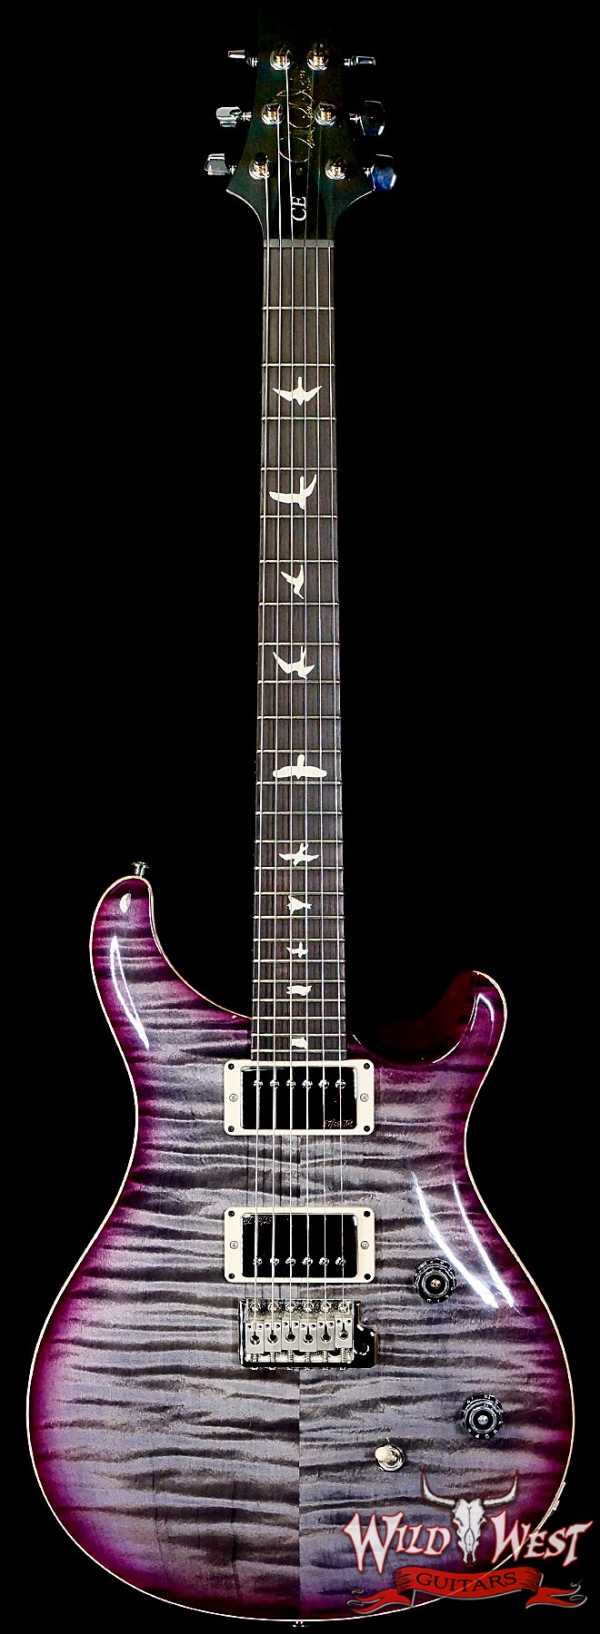 Paul Reed Smith PRS Wild West Guitars Special Run CE 24 Painted Black Neck 57/08 Covered Pickups Faded Grey Black Purple Burst 7.75 LBS